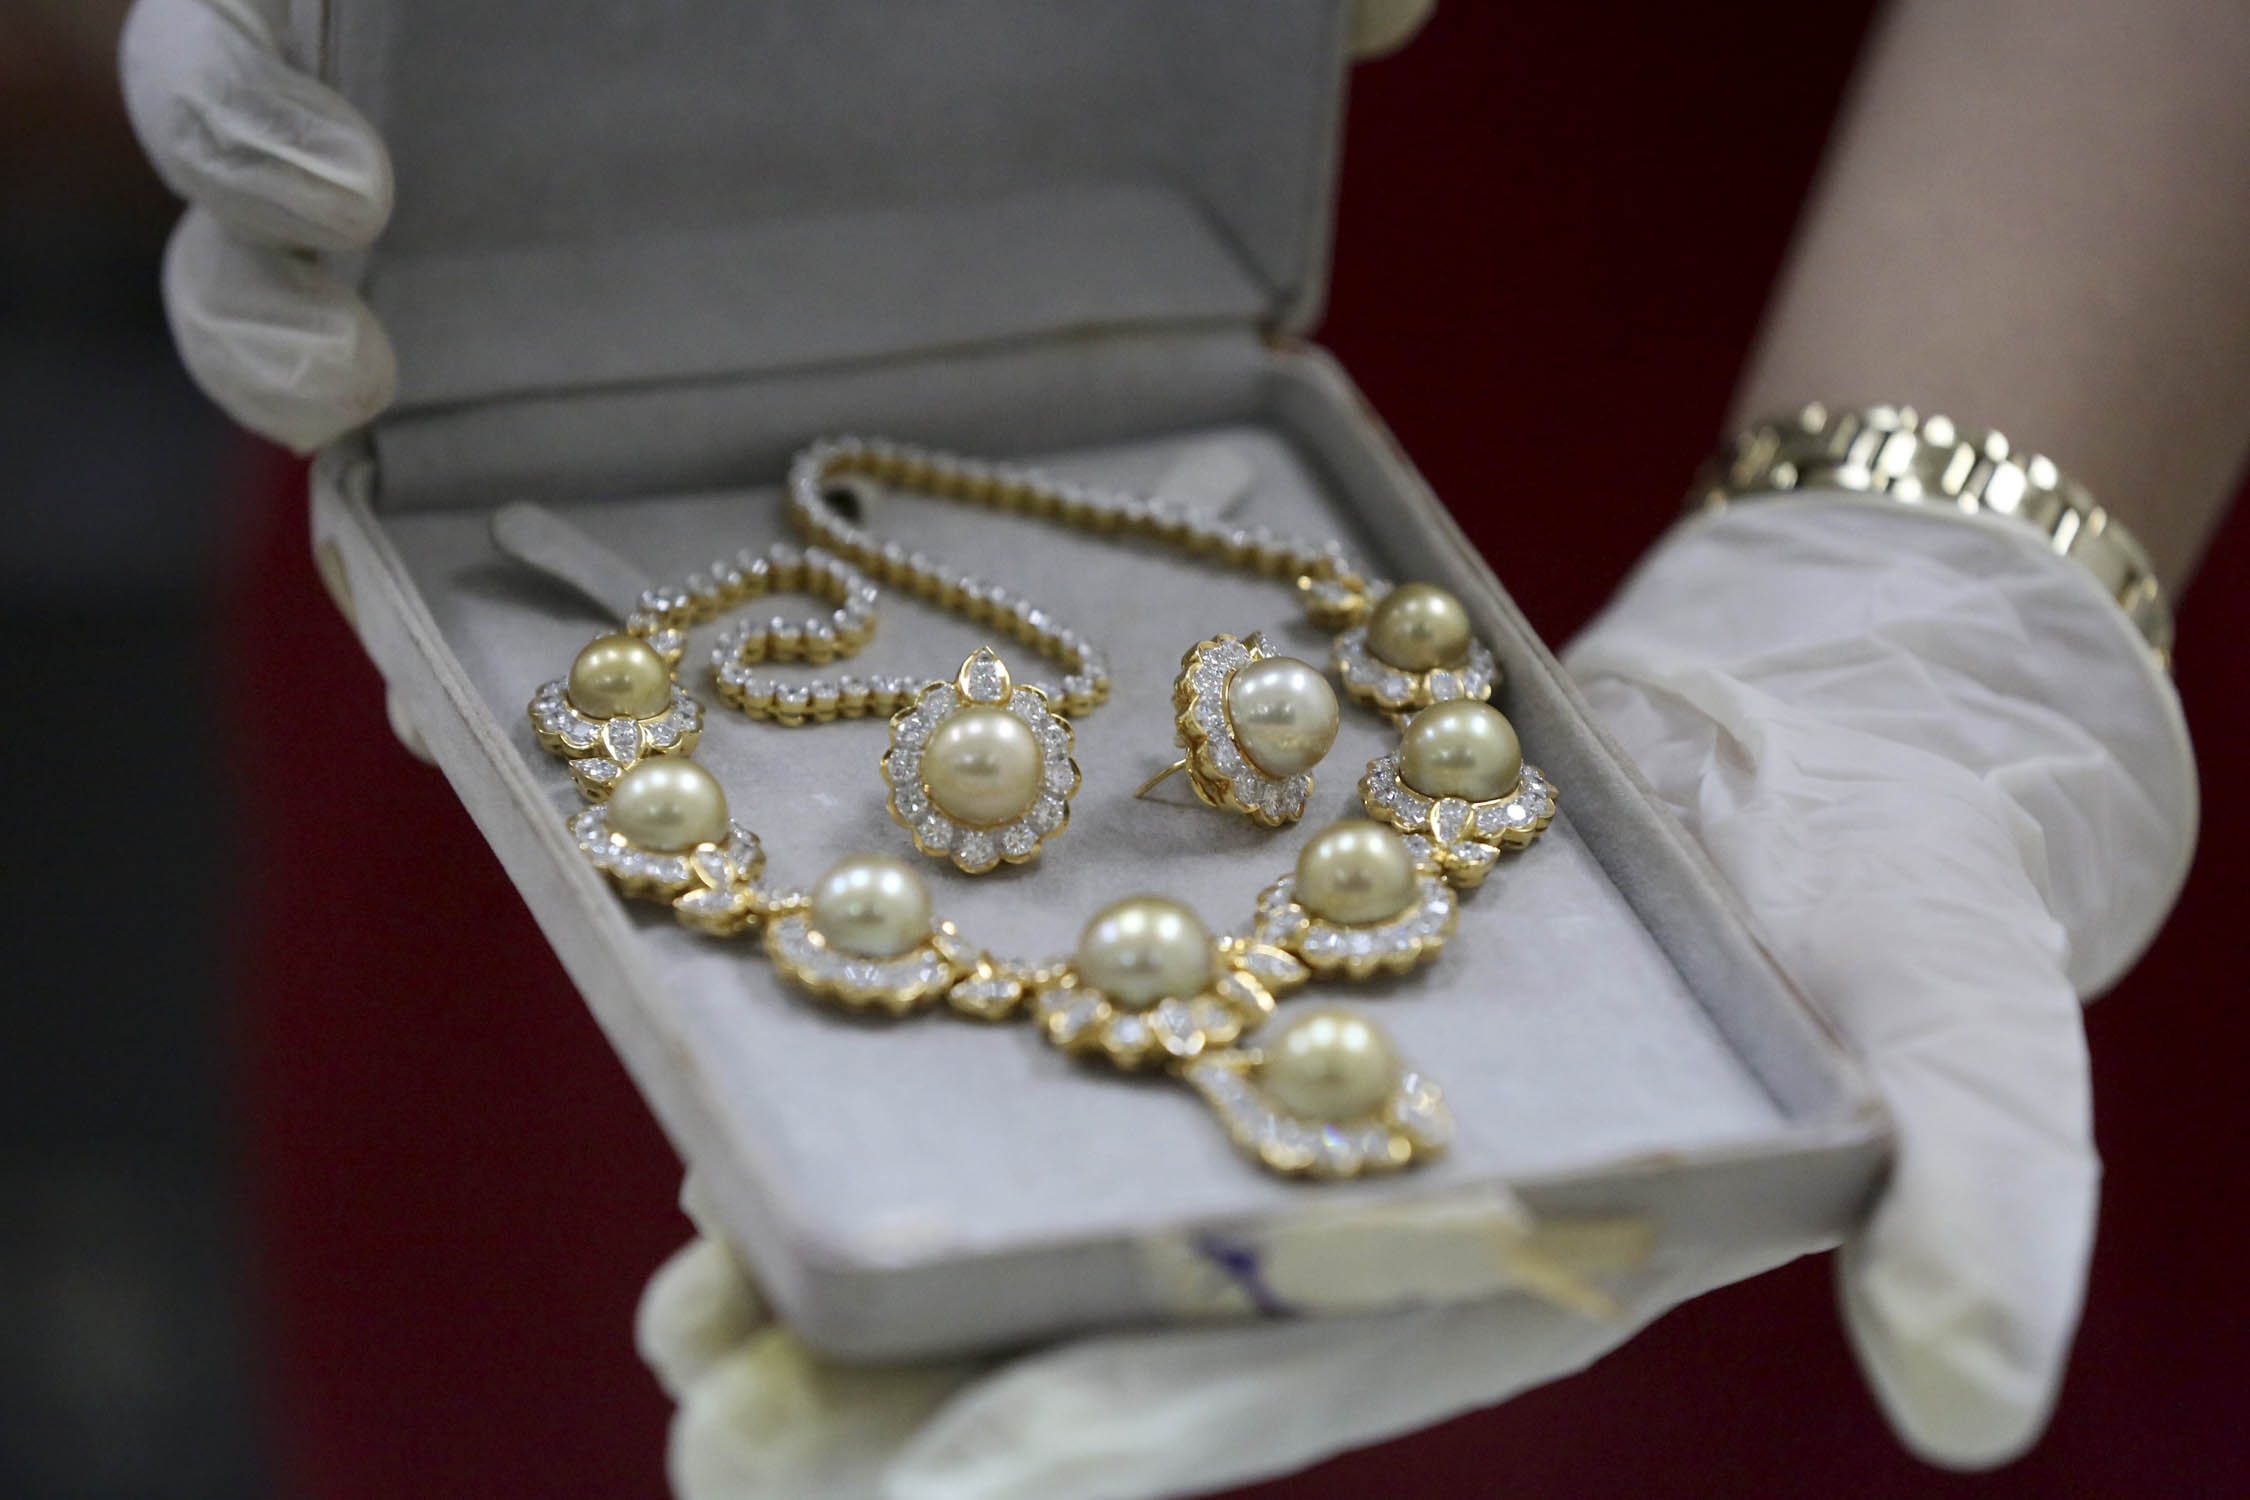 Duterte gives go signal to sell Marcos jewelry